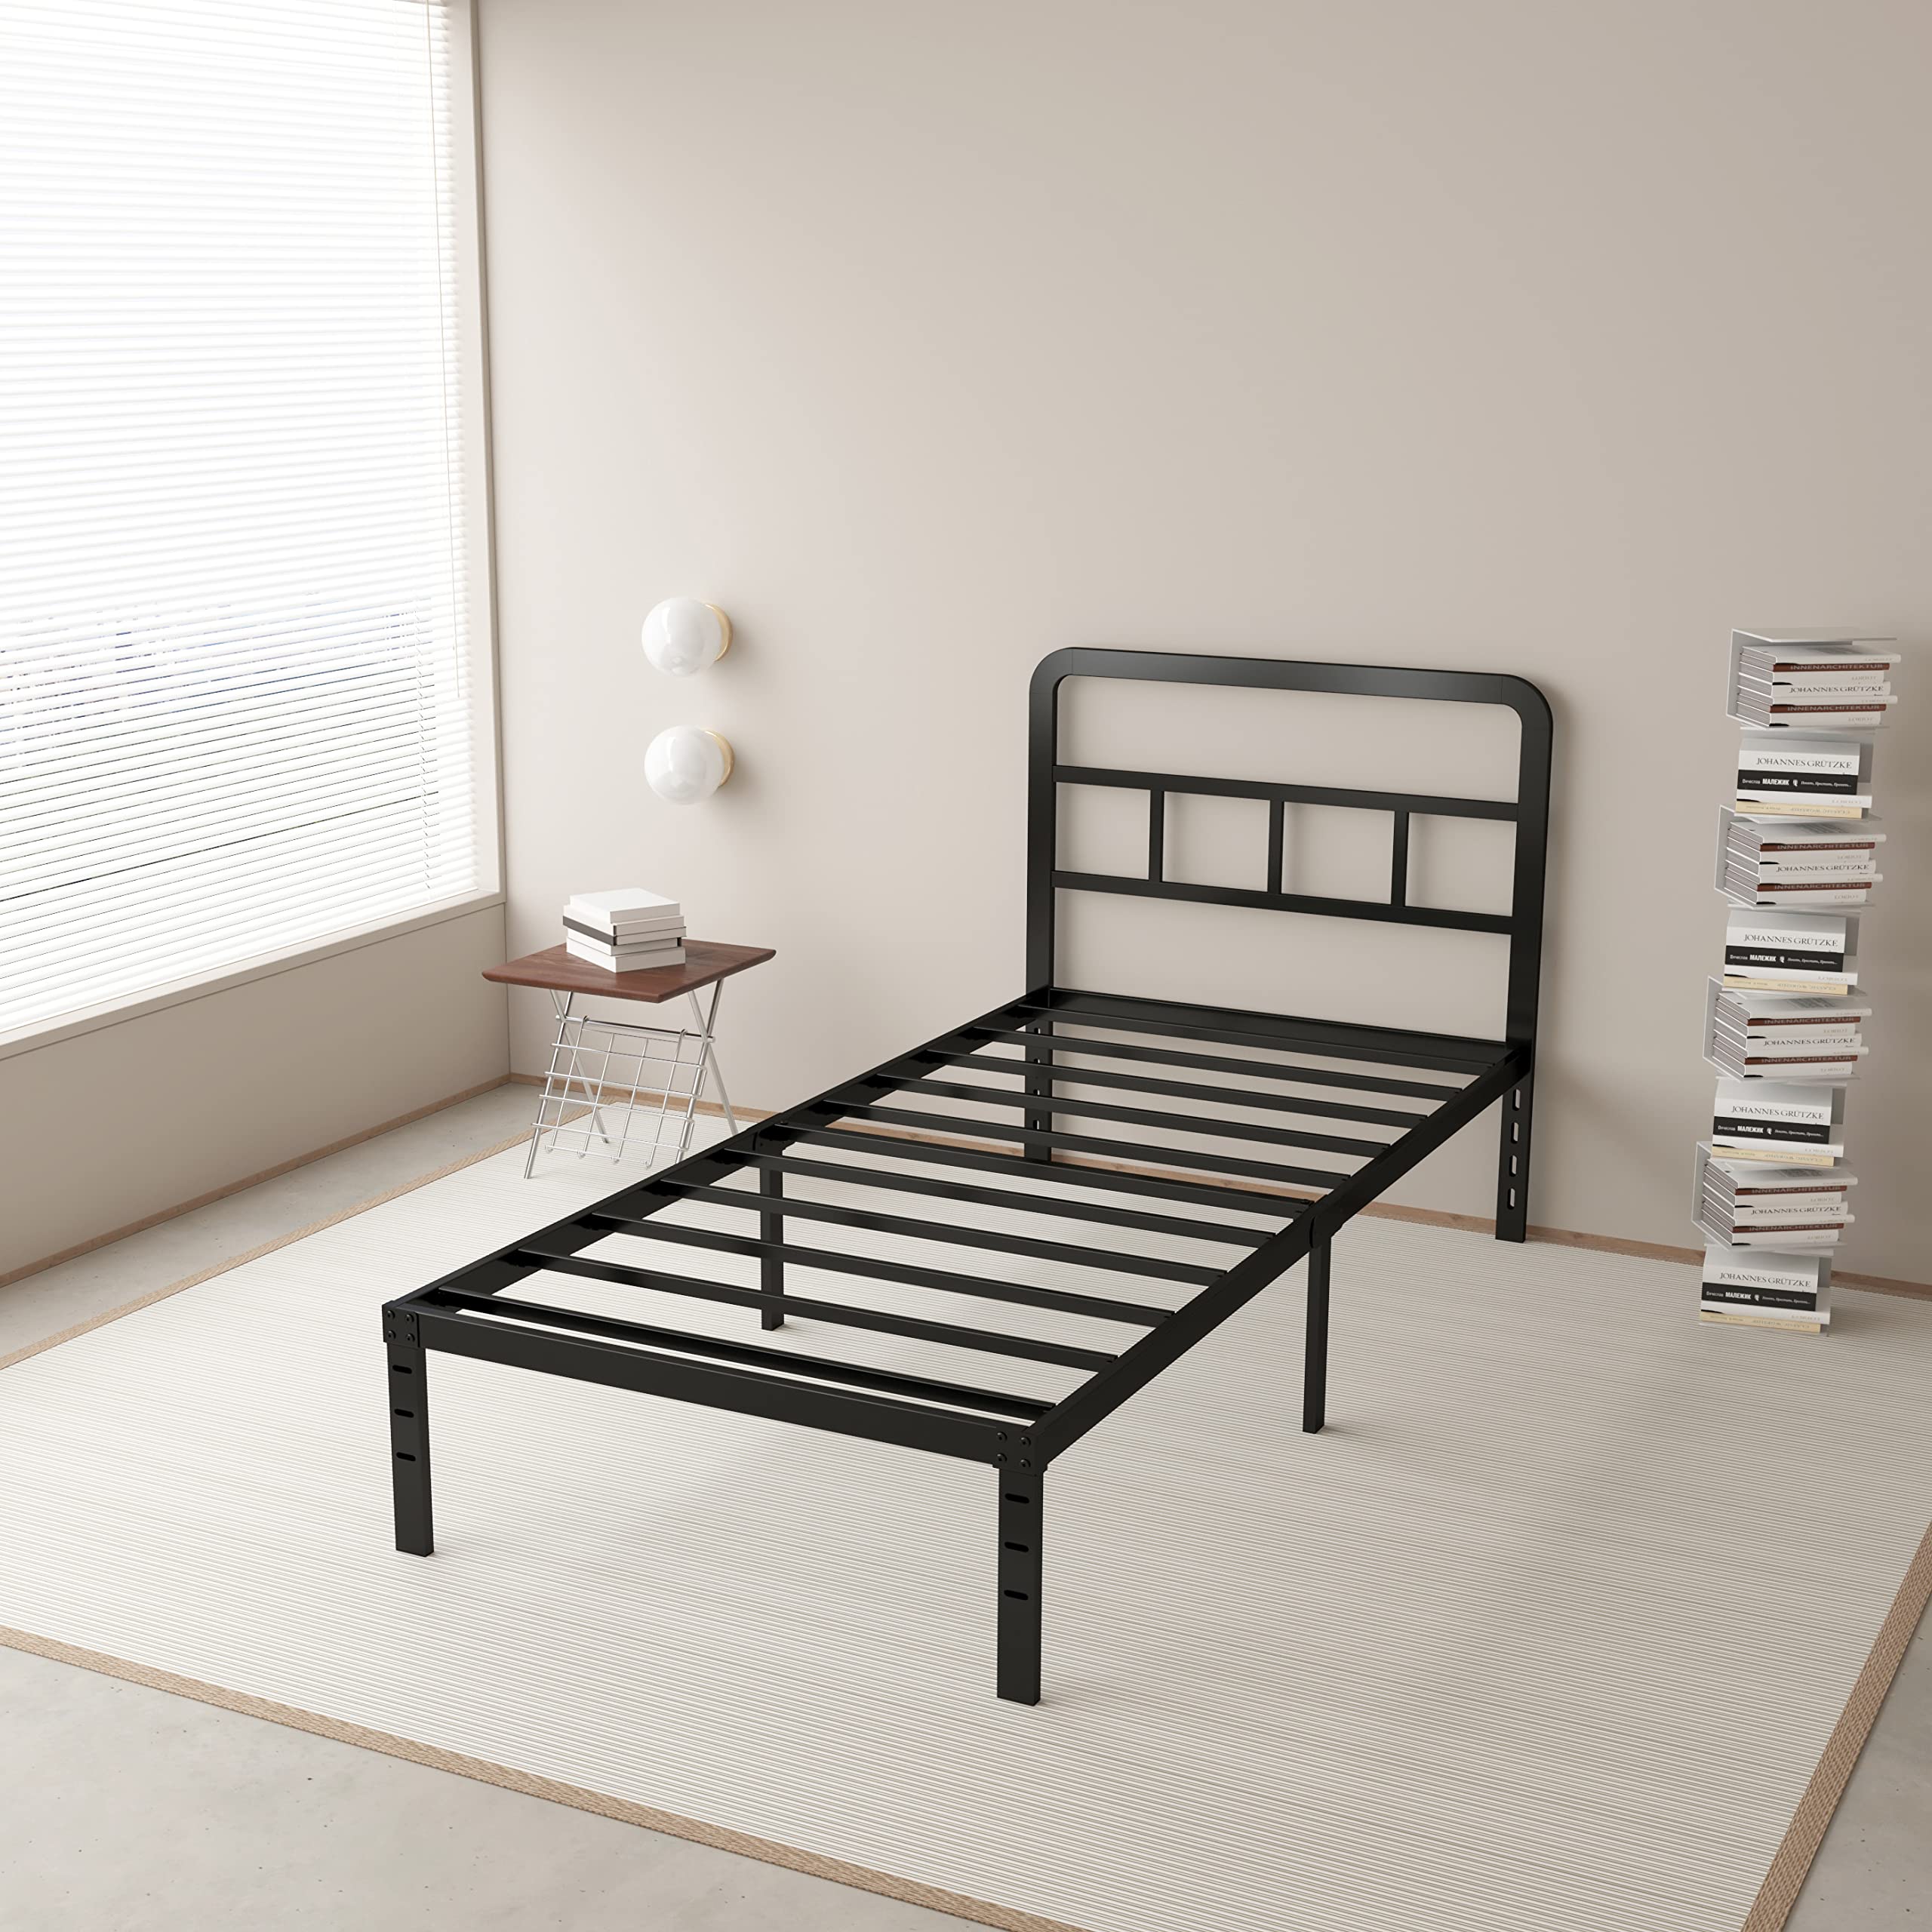 Maenizi Twin Bed Frames with Headboard, 14 Inch Twin Bed Frames No Box Spring Needed Support Up to 2500 lbs, Noise Free, Easy Assembely, Black